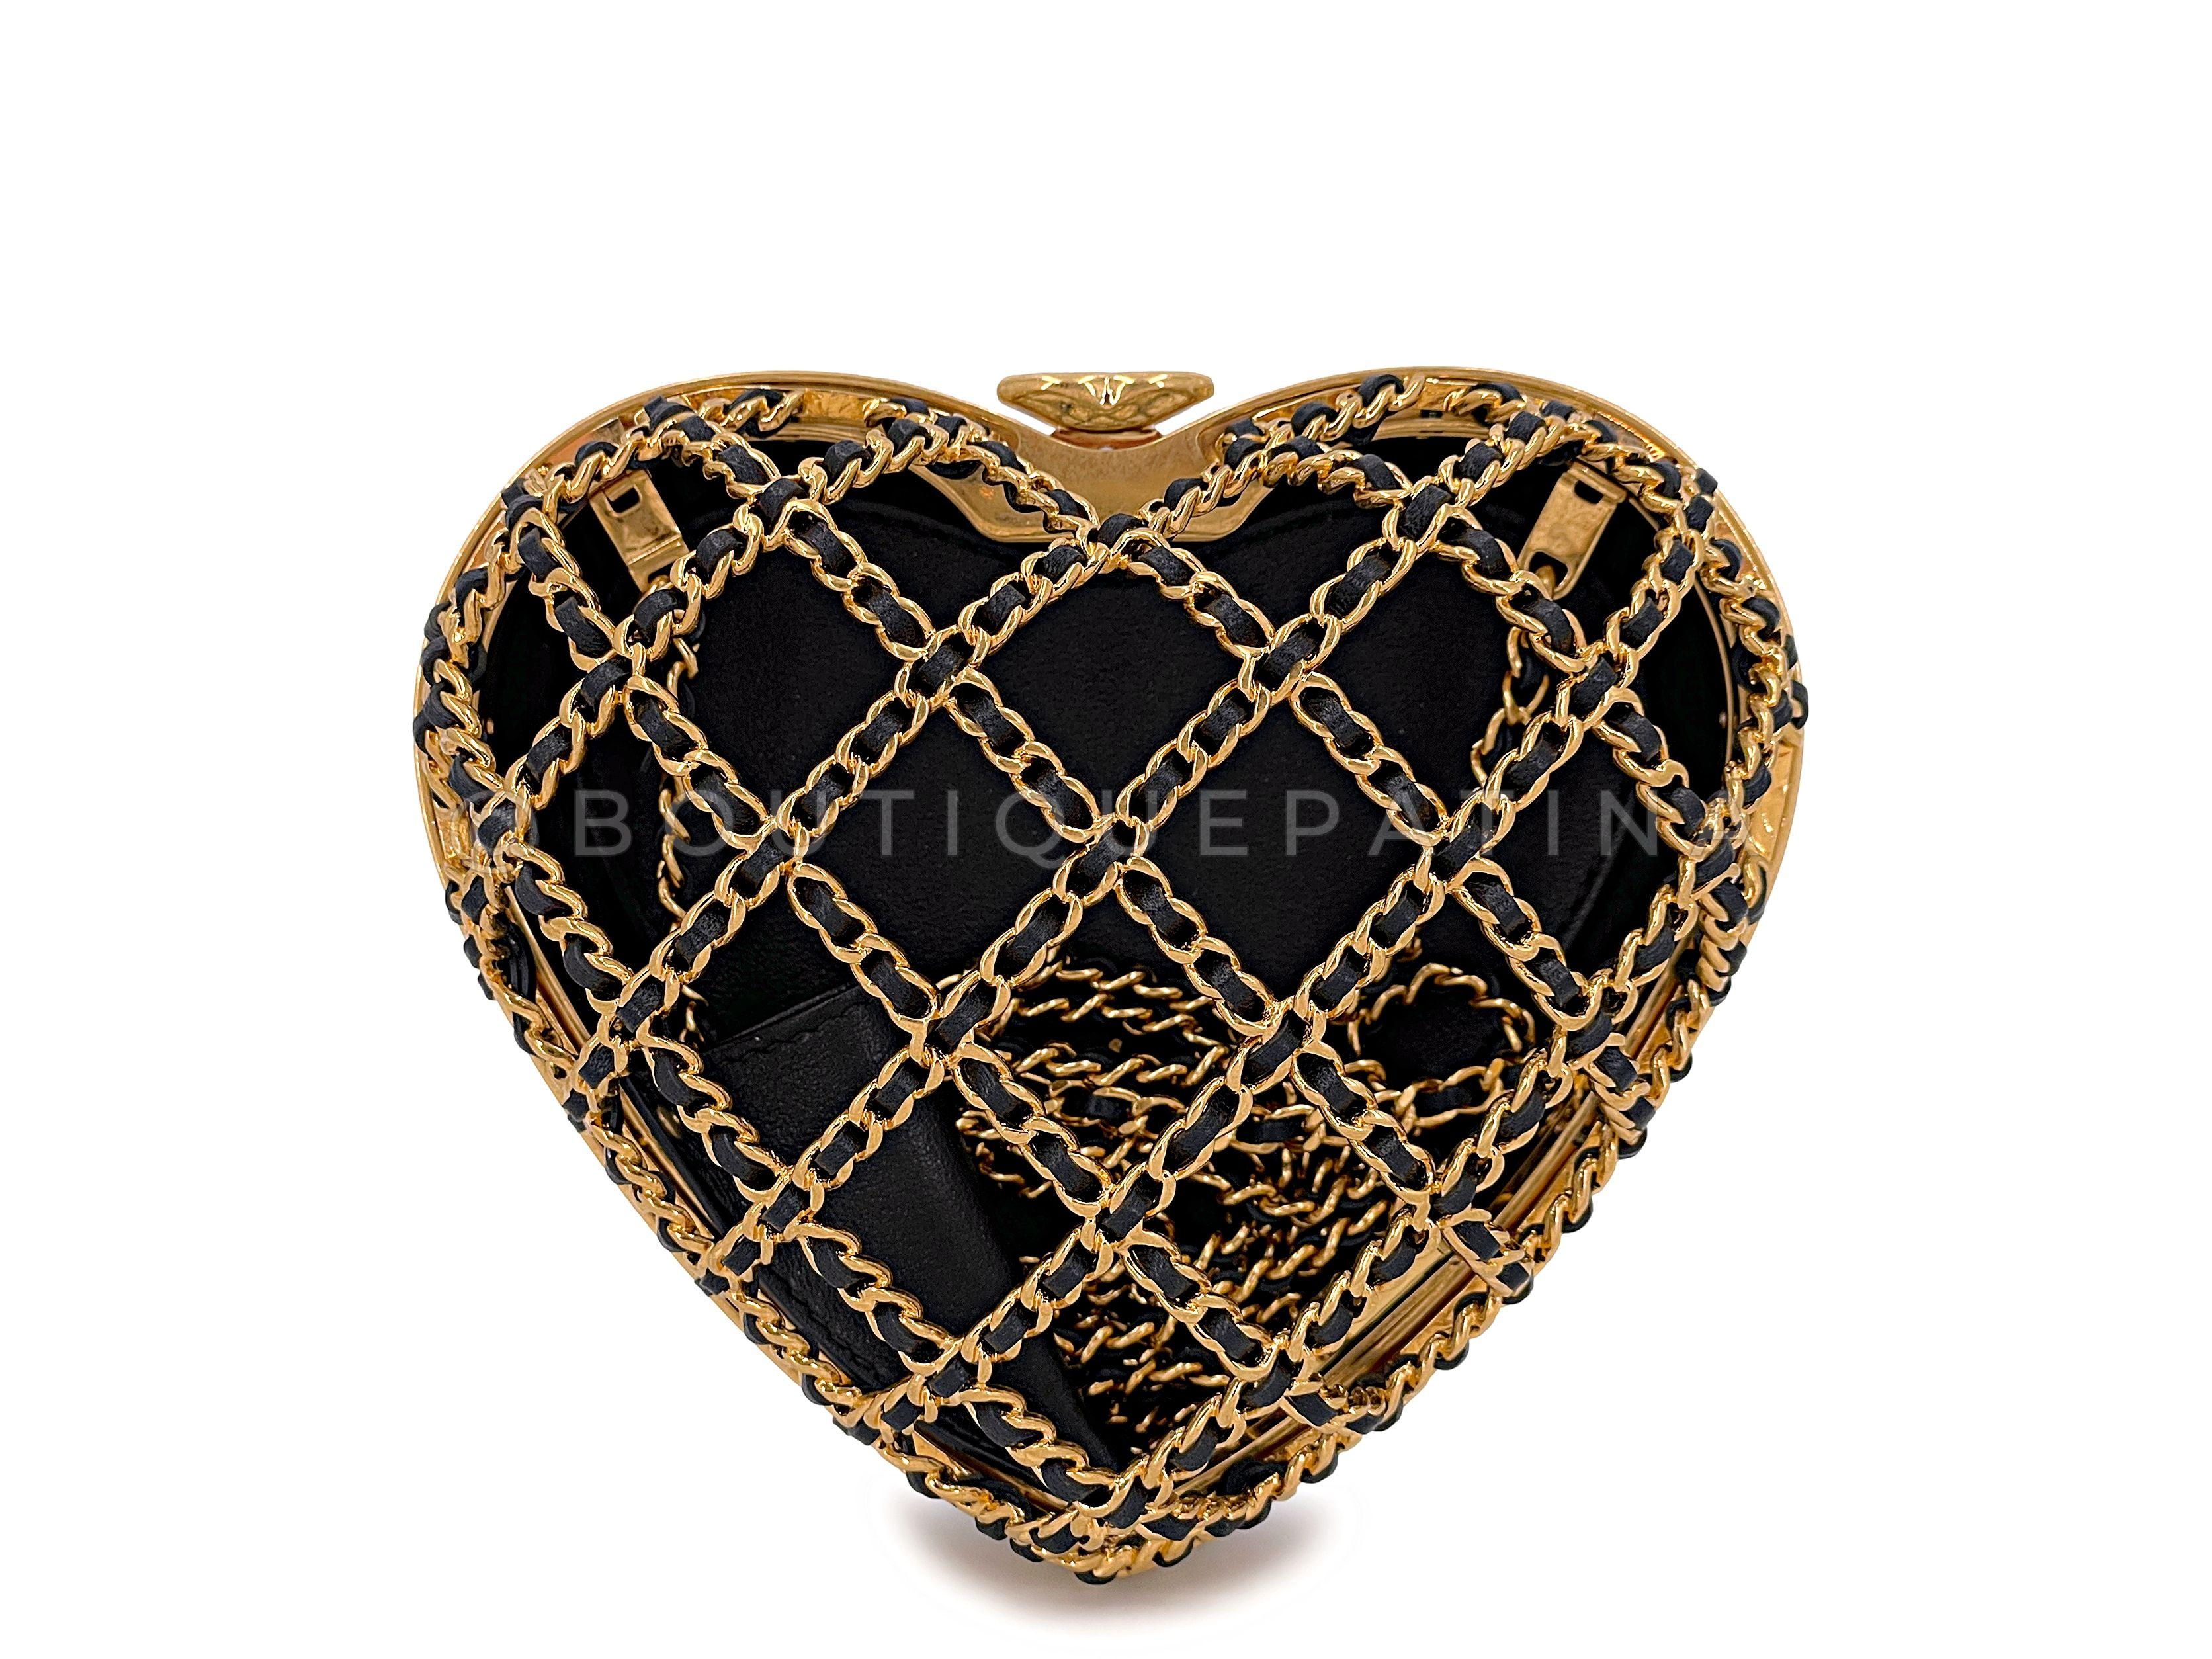 Store item: 67194
NIB 23S Chanel Caged Heart Minaudière Evening Clutch Bag Gold Black

In aged gold and black lambskin leather and aged gold hardware. Woven crossbody strap. Leather lining and quilted leather back. 

For 20 years, Boutique Patina